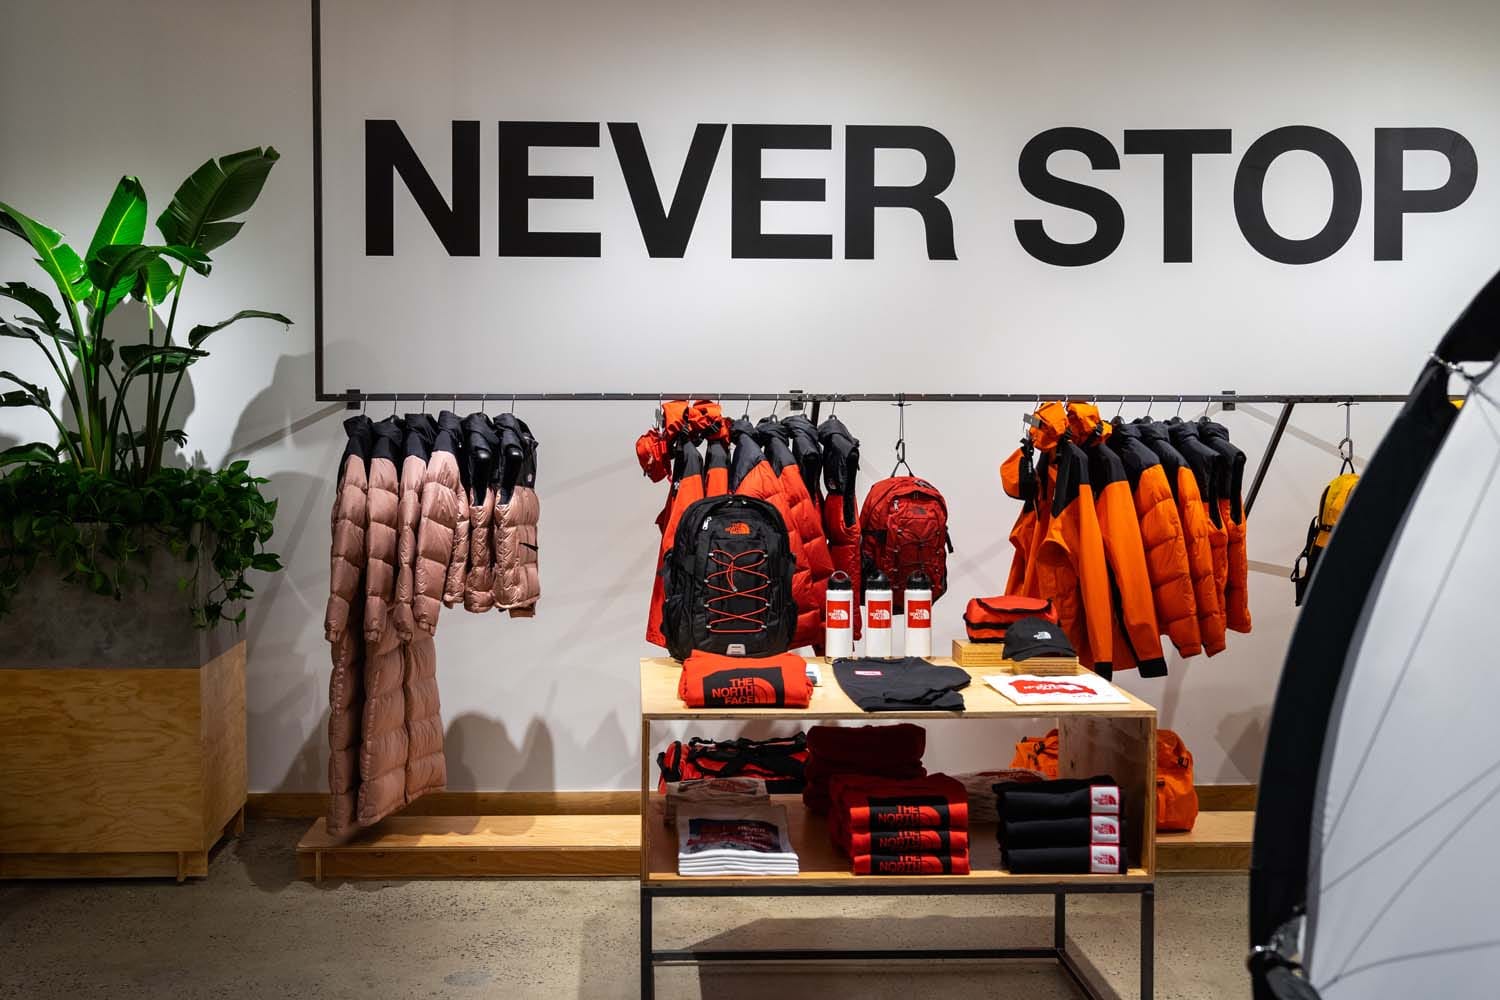 The North Face Prototype Concept Store 